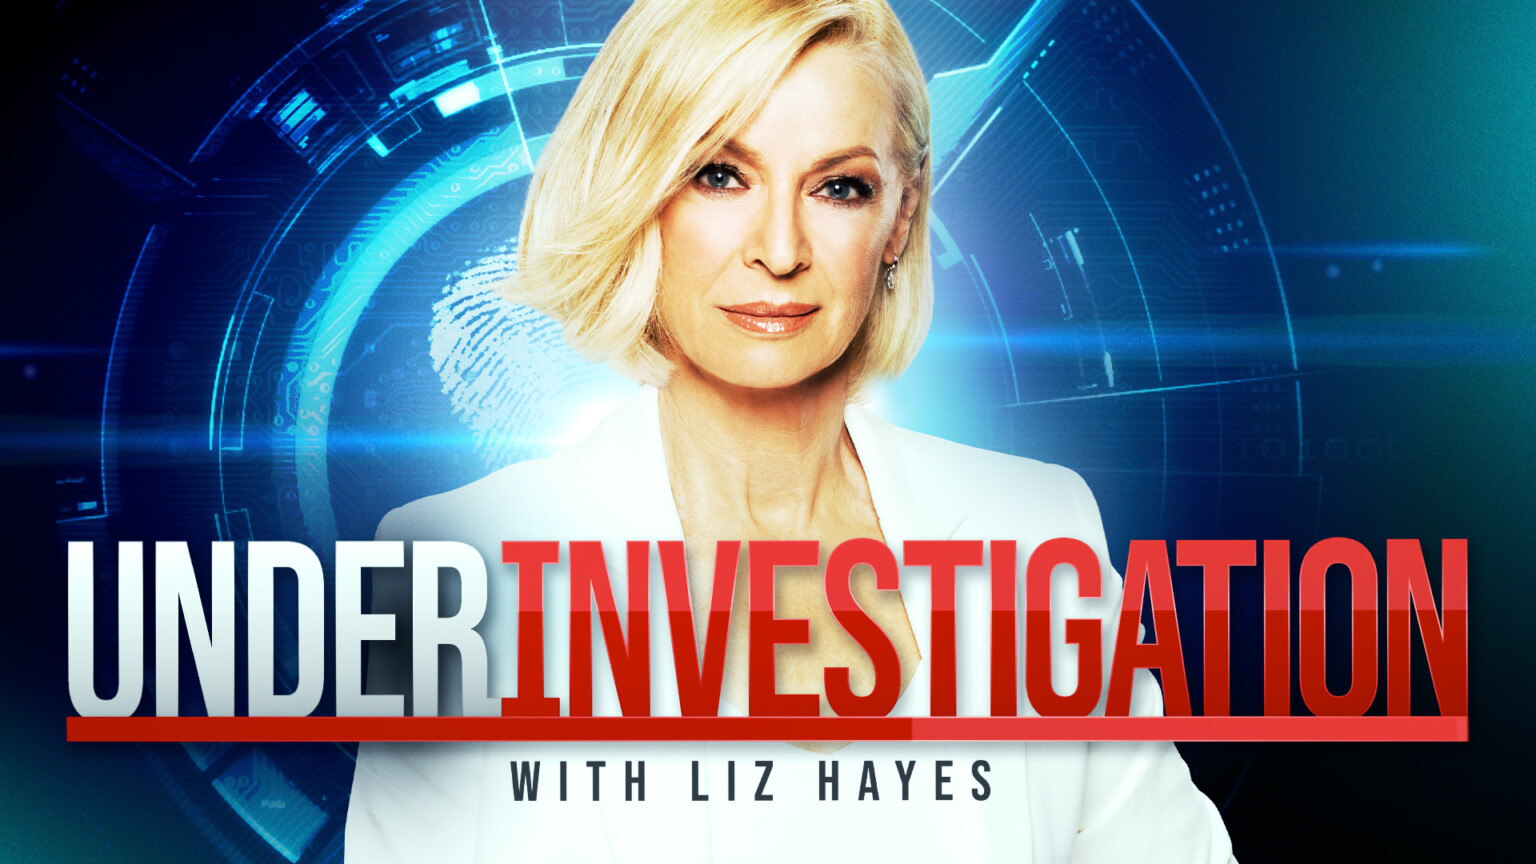 Under Investigation with Liz Hayes returns to uncover the missing ...